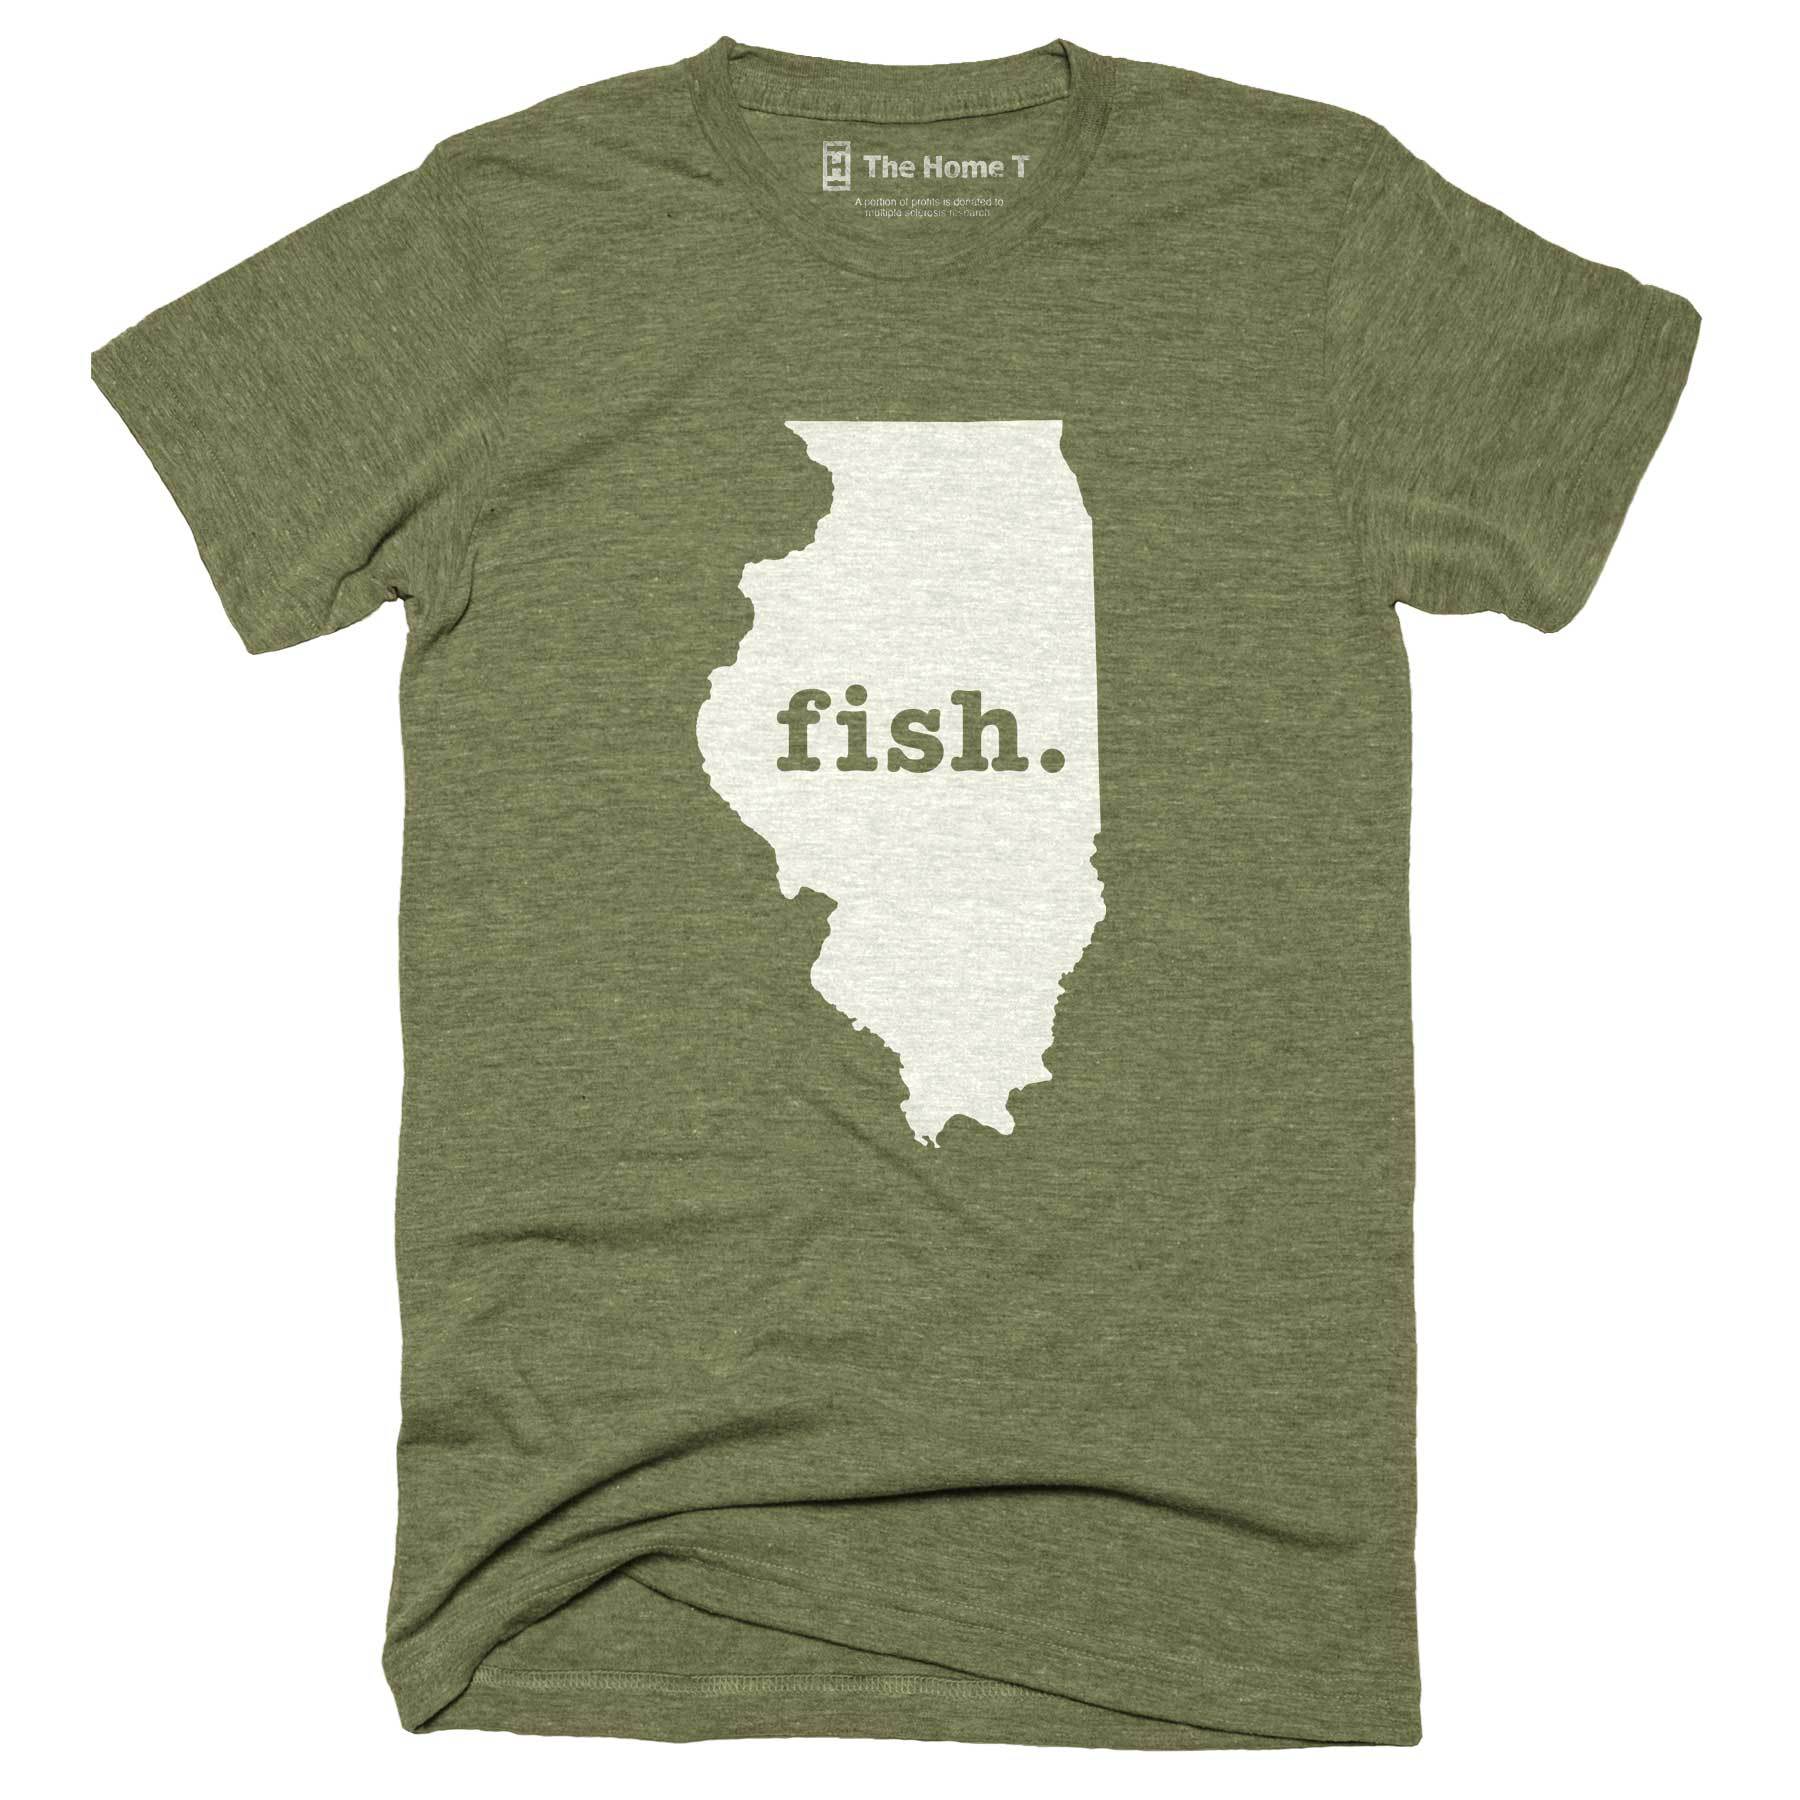 Illinois Fish Home T-Shirt Outdoor Collection The Home T XXL Army Green